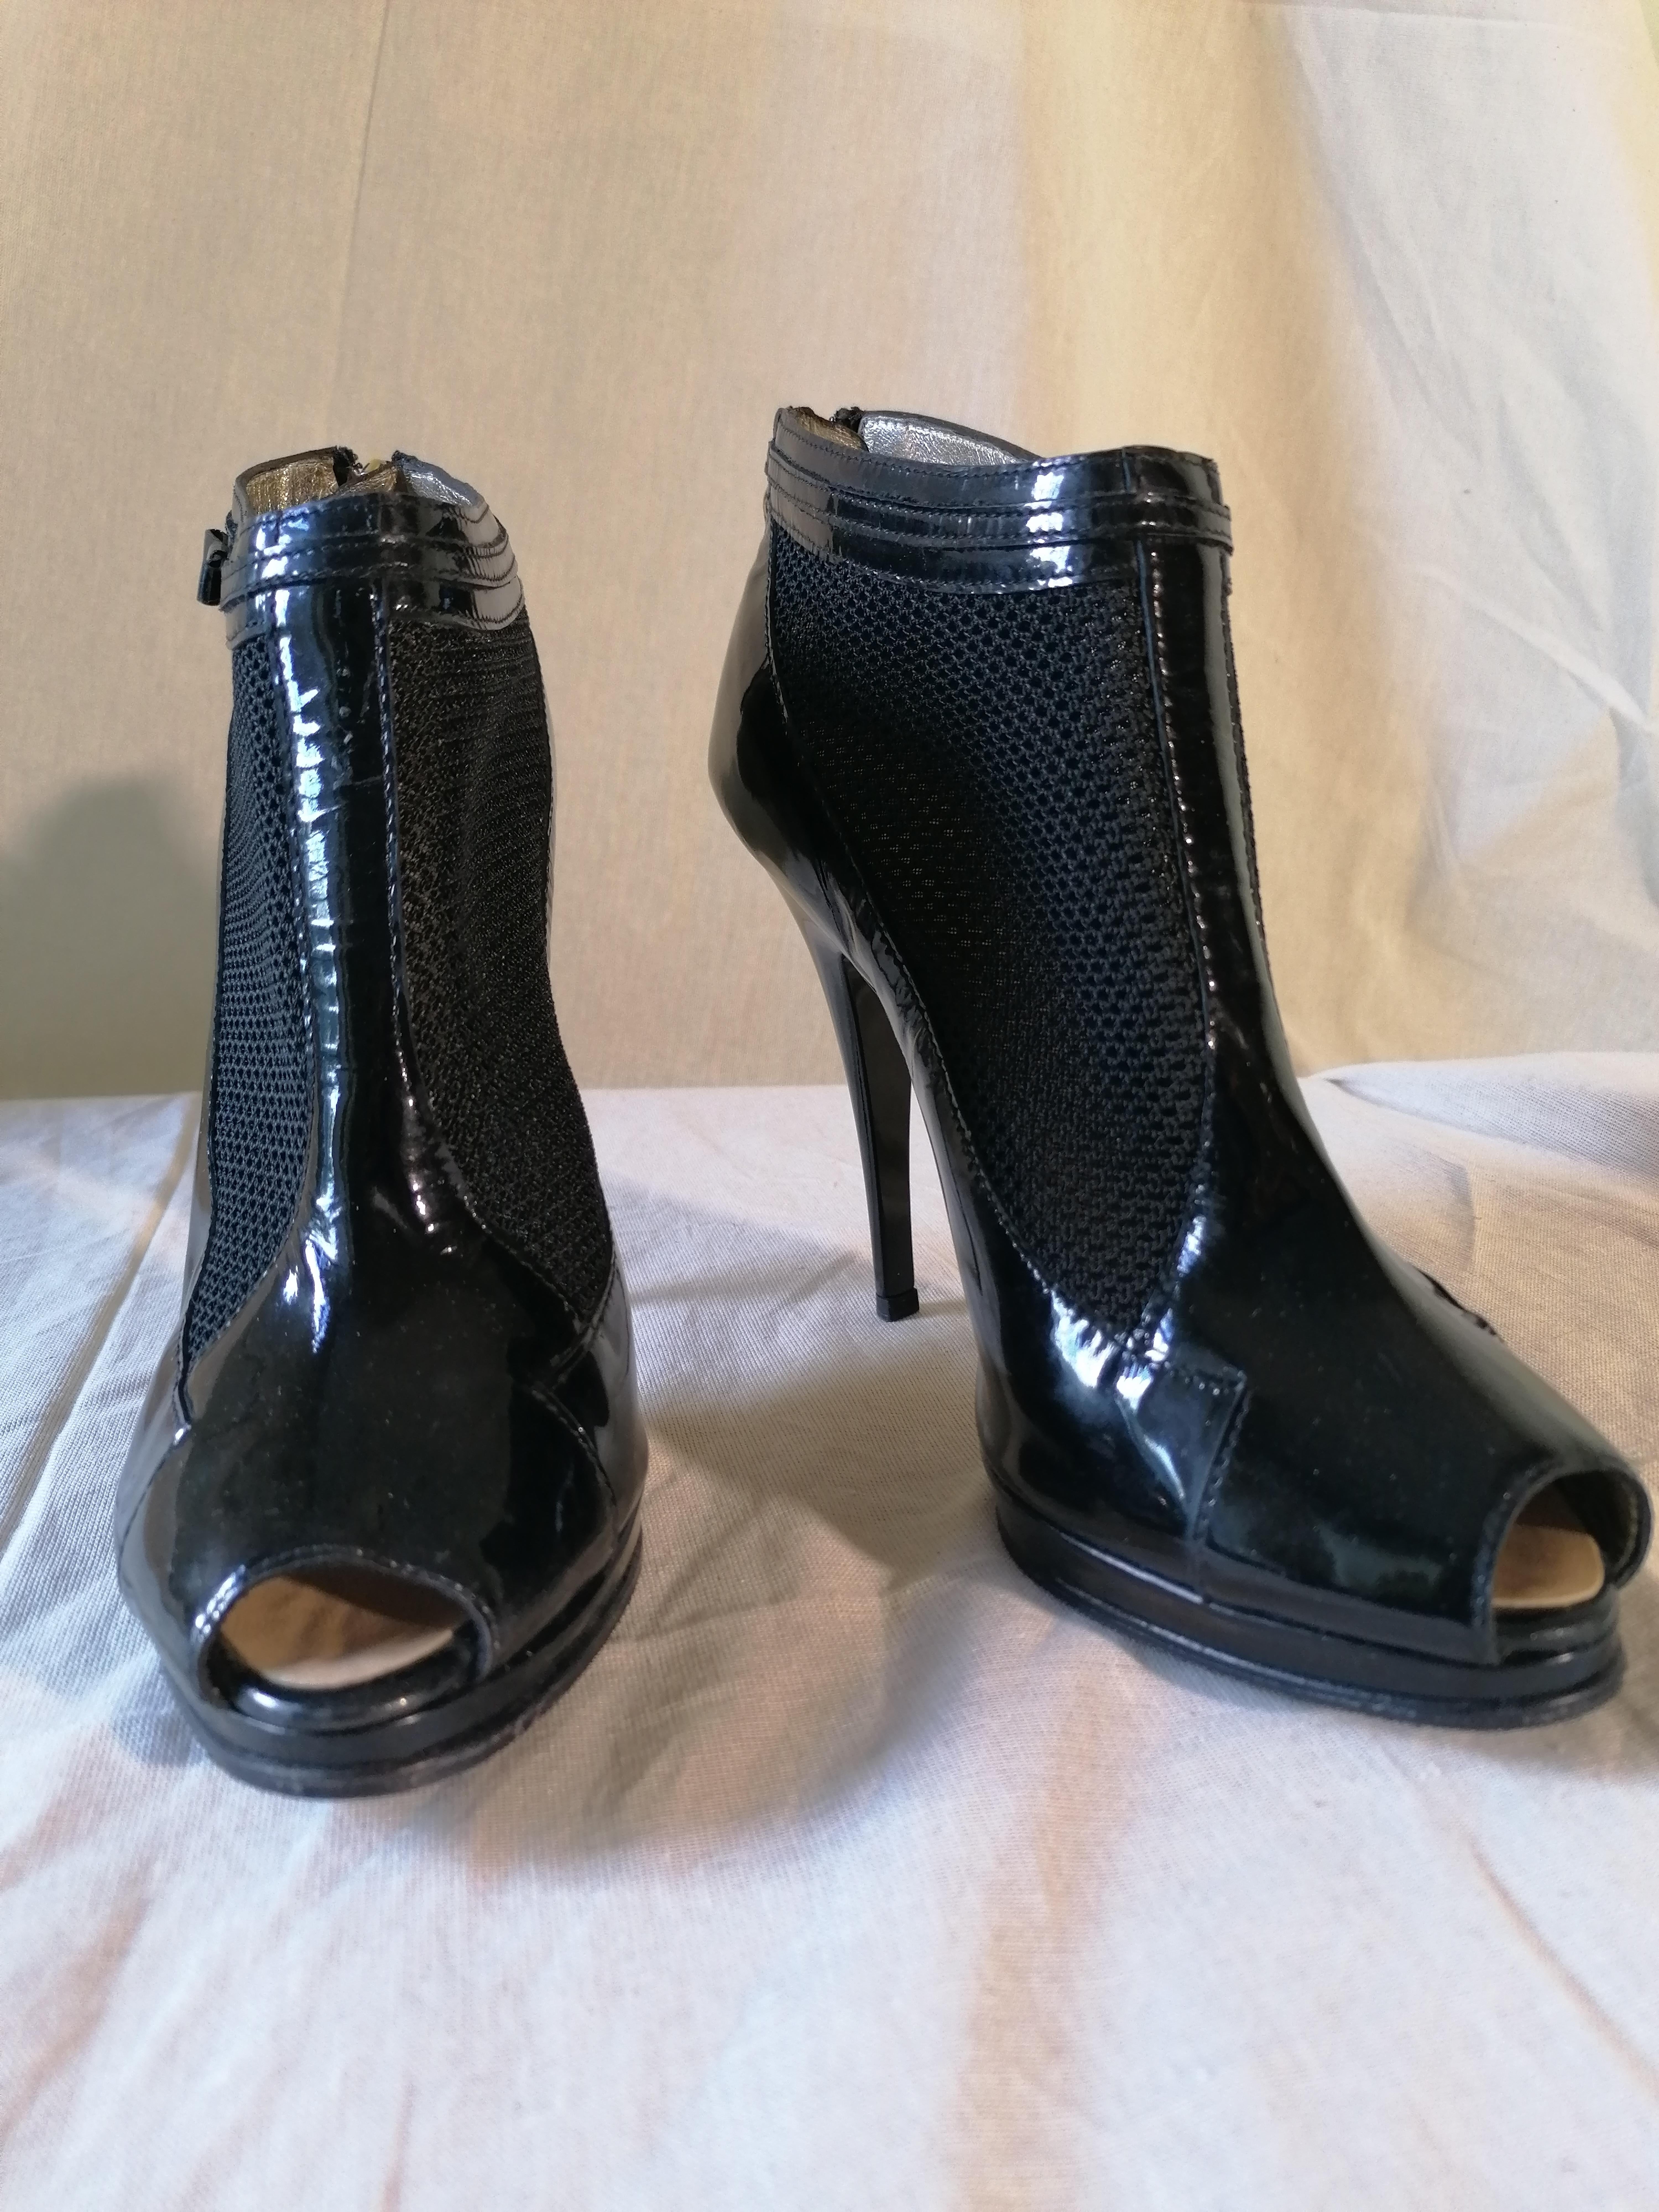 ROBERTO CAVALLI Fall 2008 Ready-to-Wear Collection BOOTS For Sale 12